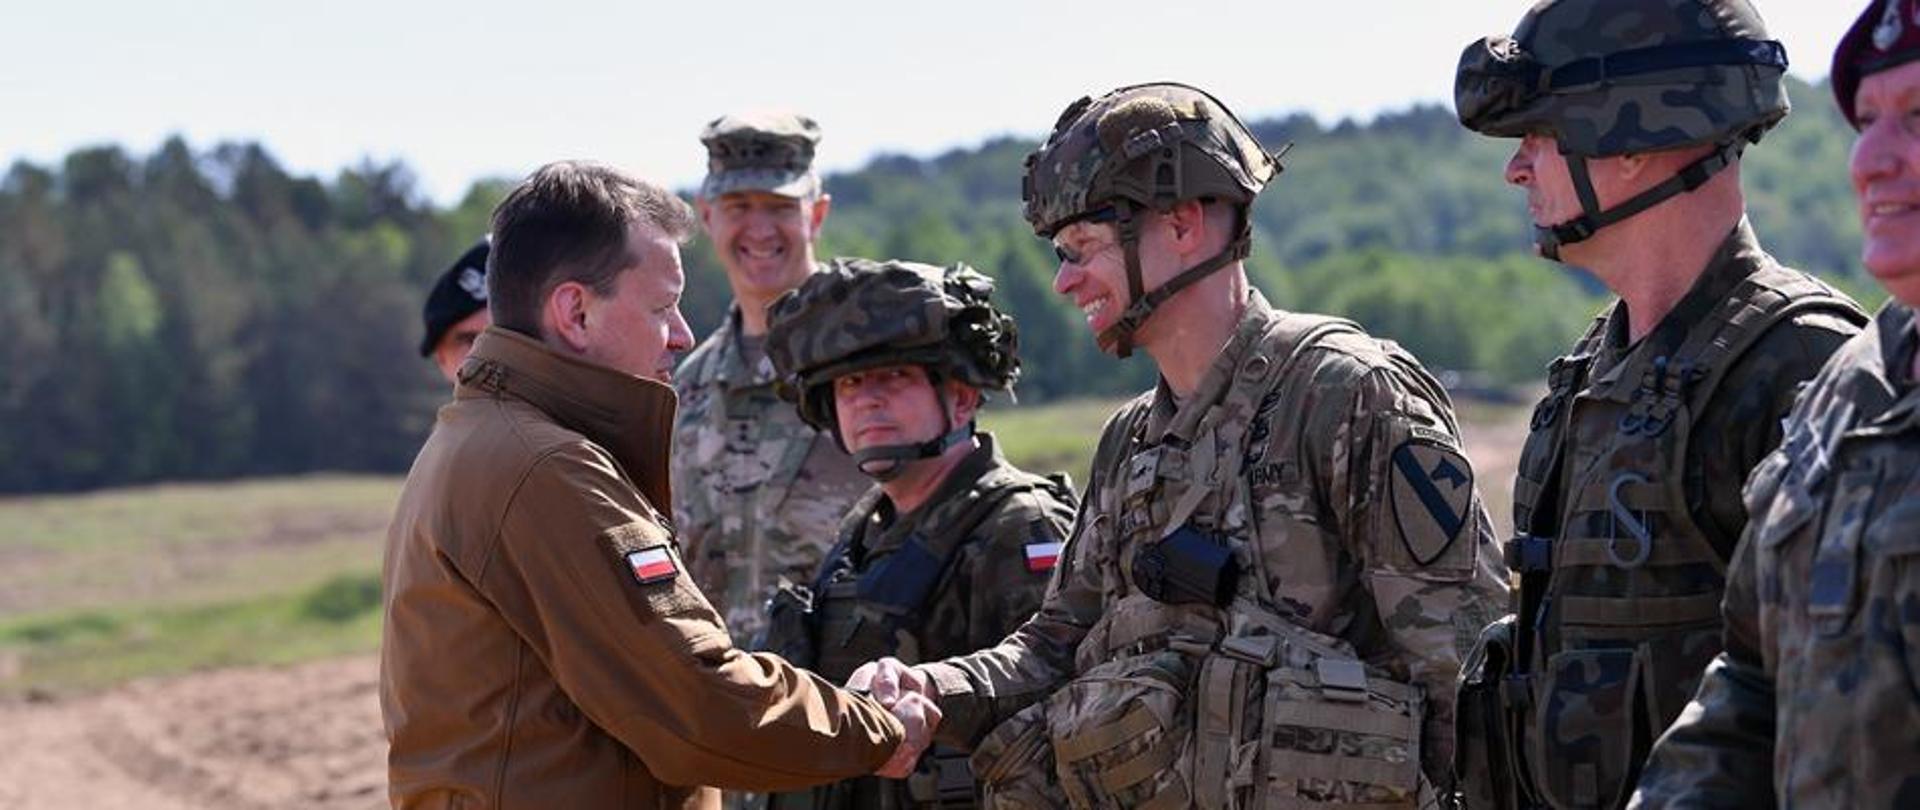 The head of the Ministry of National Defence greets US and Polish soldiers at the Drawsko training ground. In the background forest and sand. Soldiers in a row standing in front of the Minister of Defence.